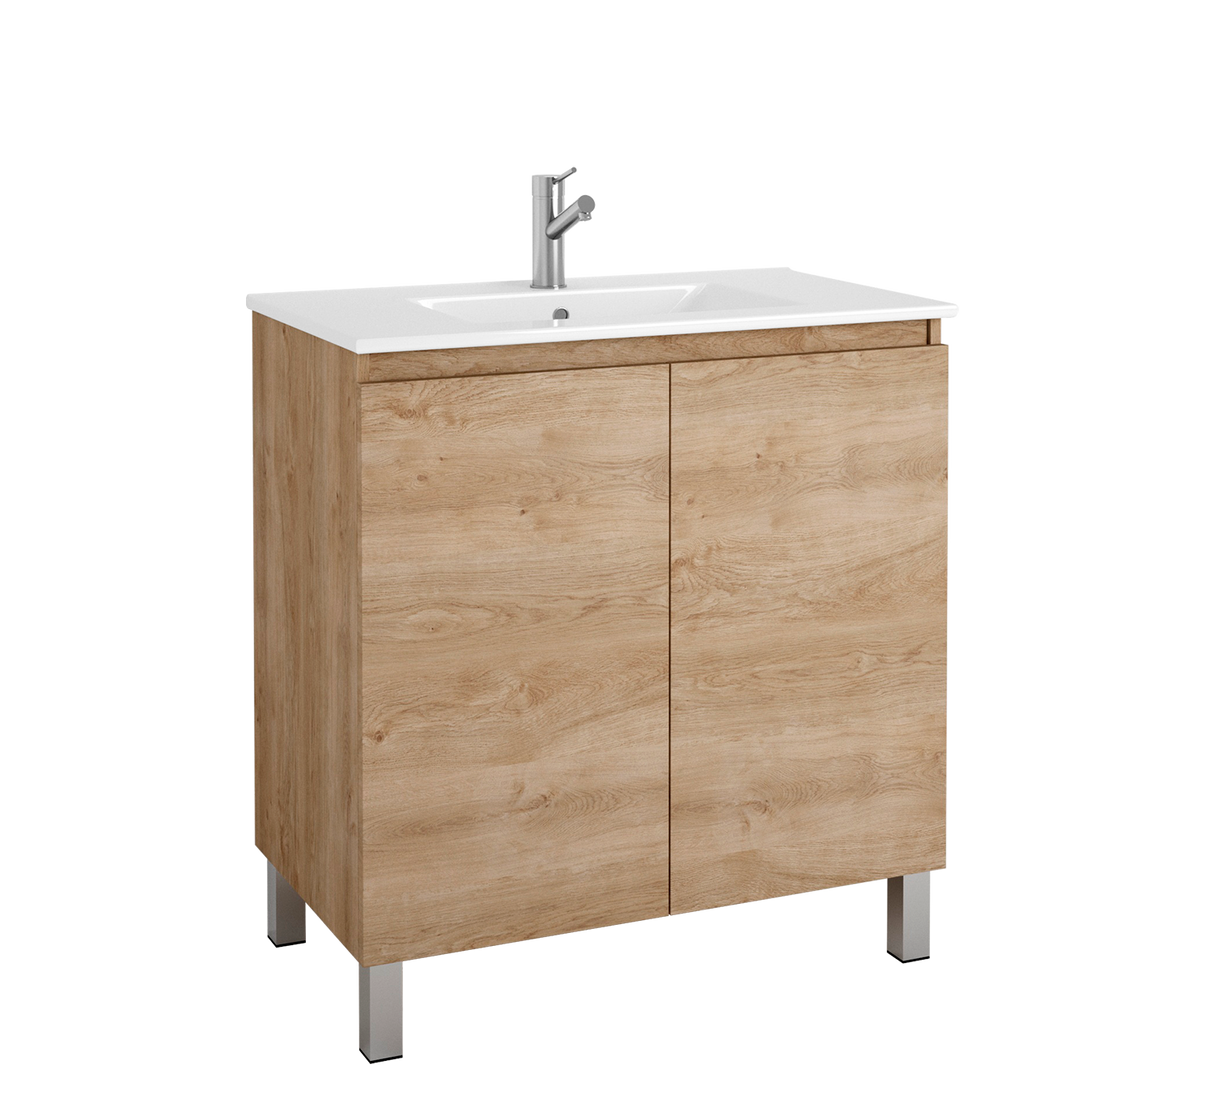 DAX Sunset Engineered Wood and Porcelain Onix Basin with Vanity, 32", Oak DAX-SUN013214-ONX